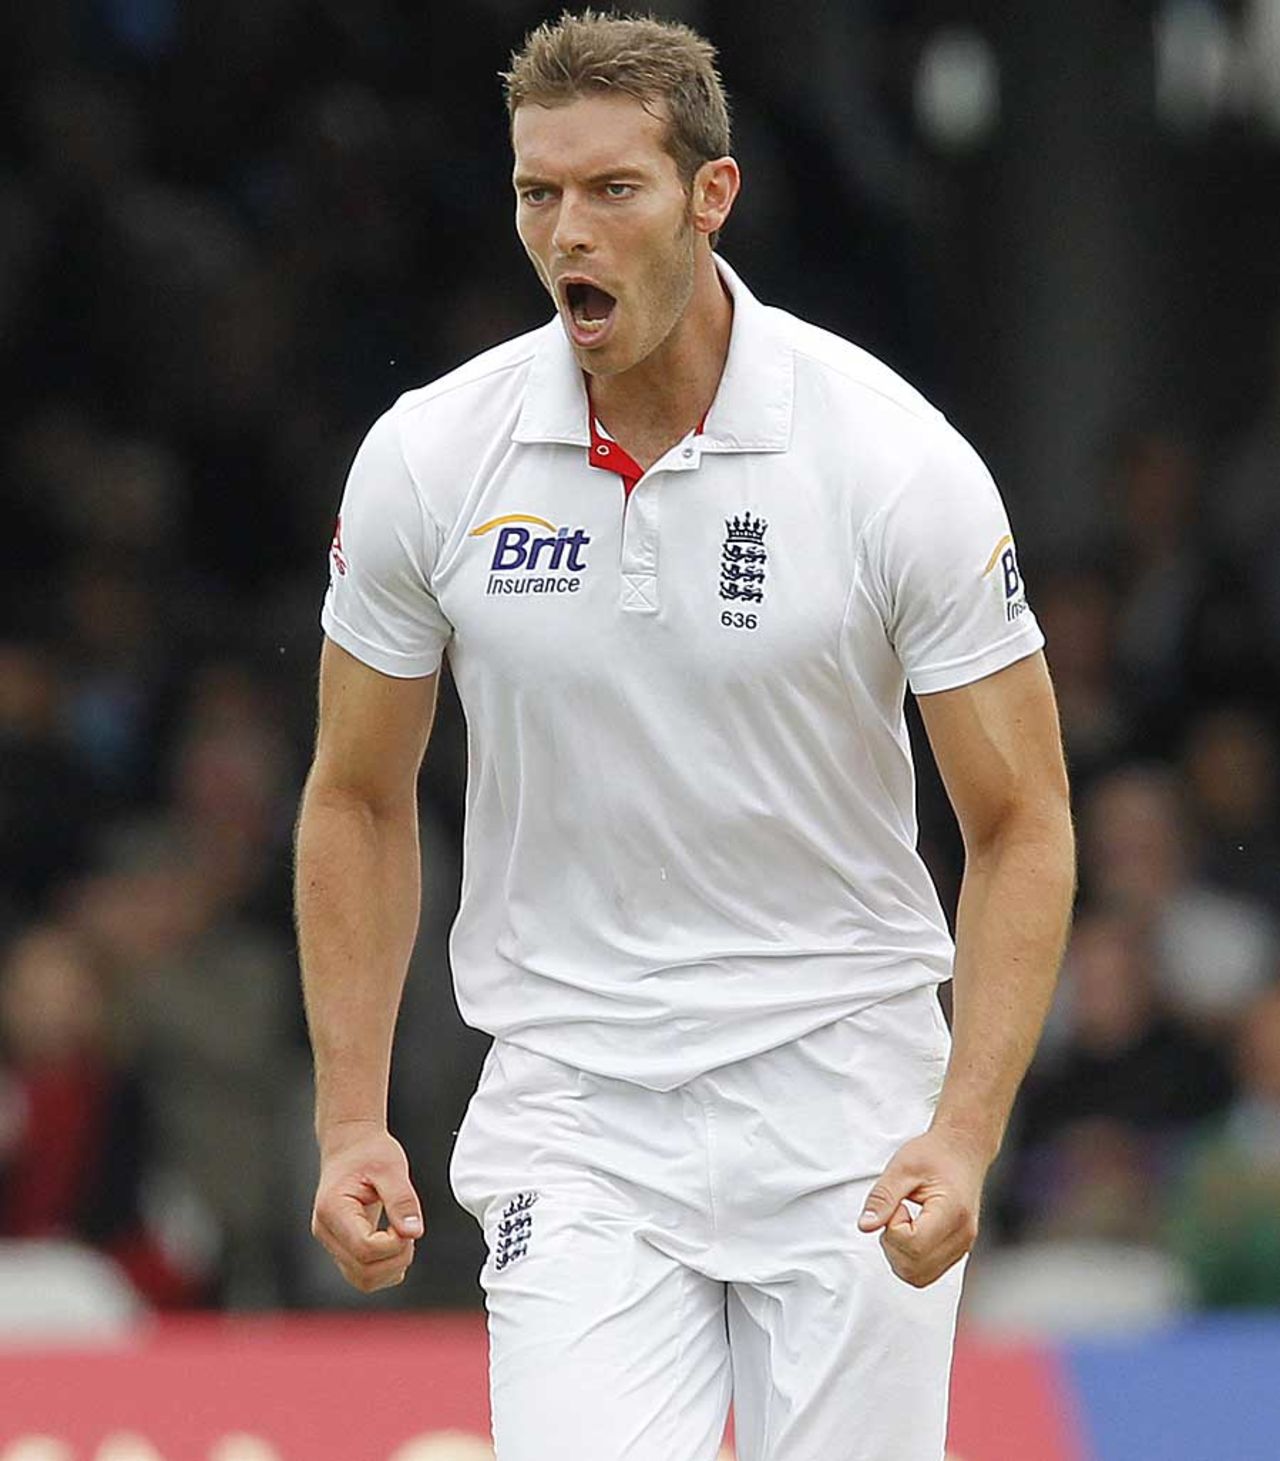 Chris Tremlett looks an imposing figure as he celebrates a wicket, England v India, 1st Test, Lord's, 3rd day, July 23, 2011